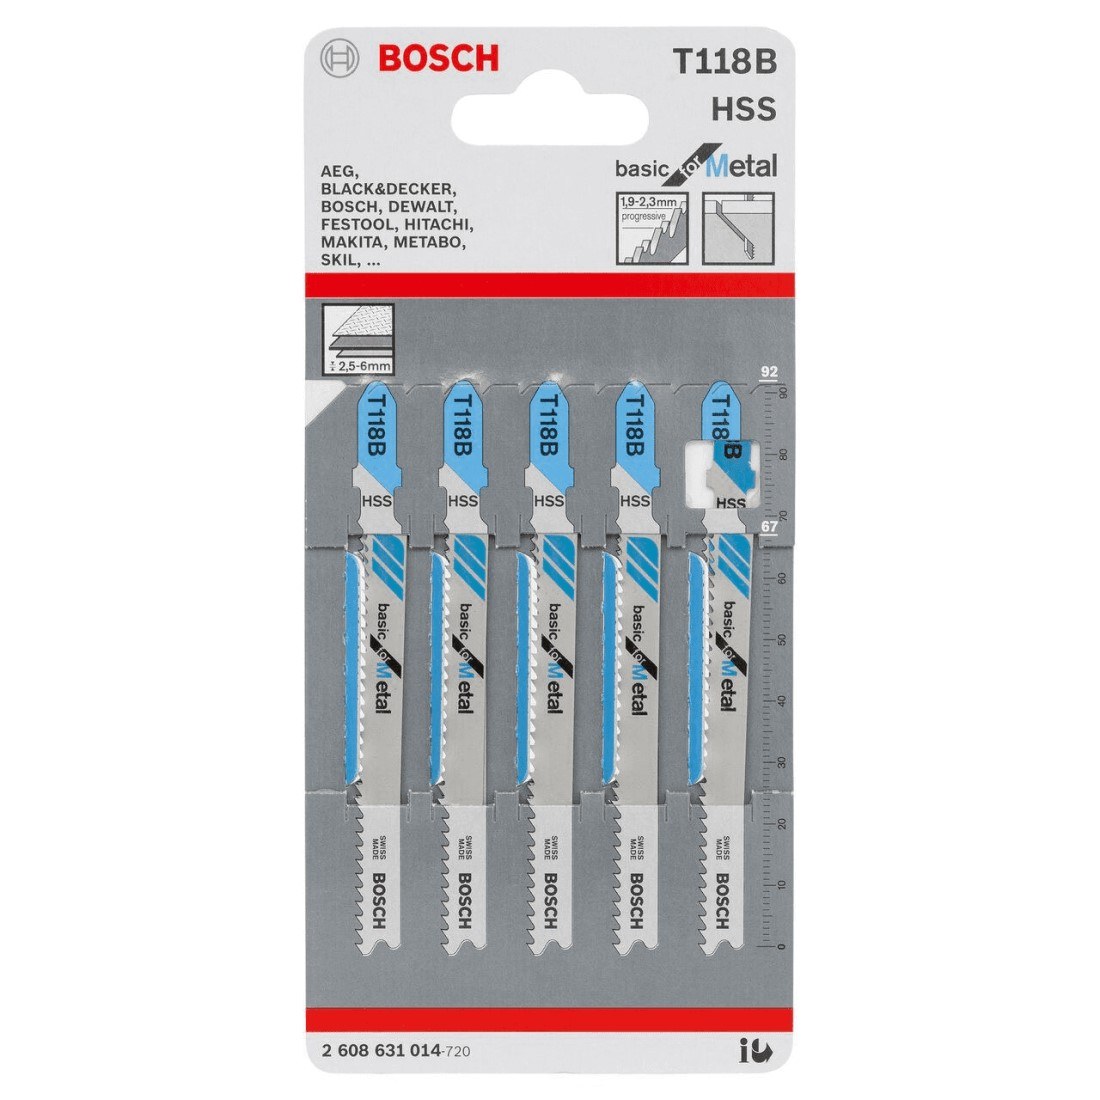 Bosch Jigsaw Blades T 118 B Basic for Metal 5 pack 2608631014 Power Tool Services